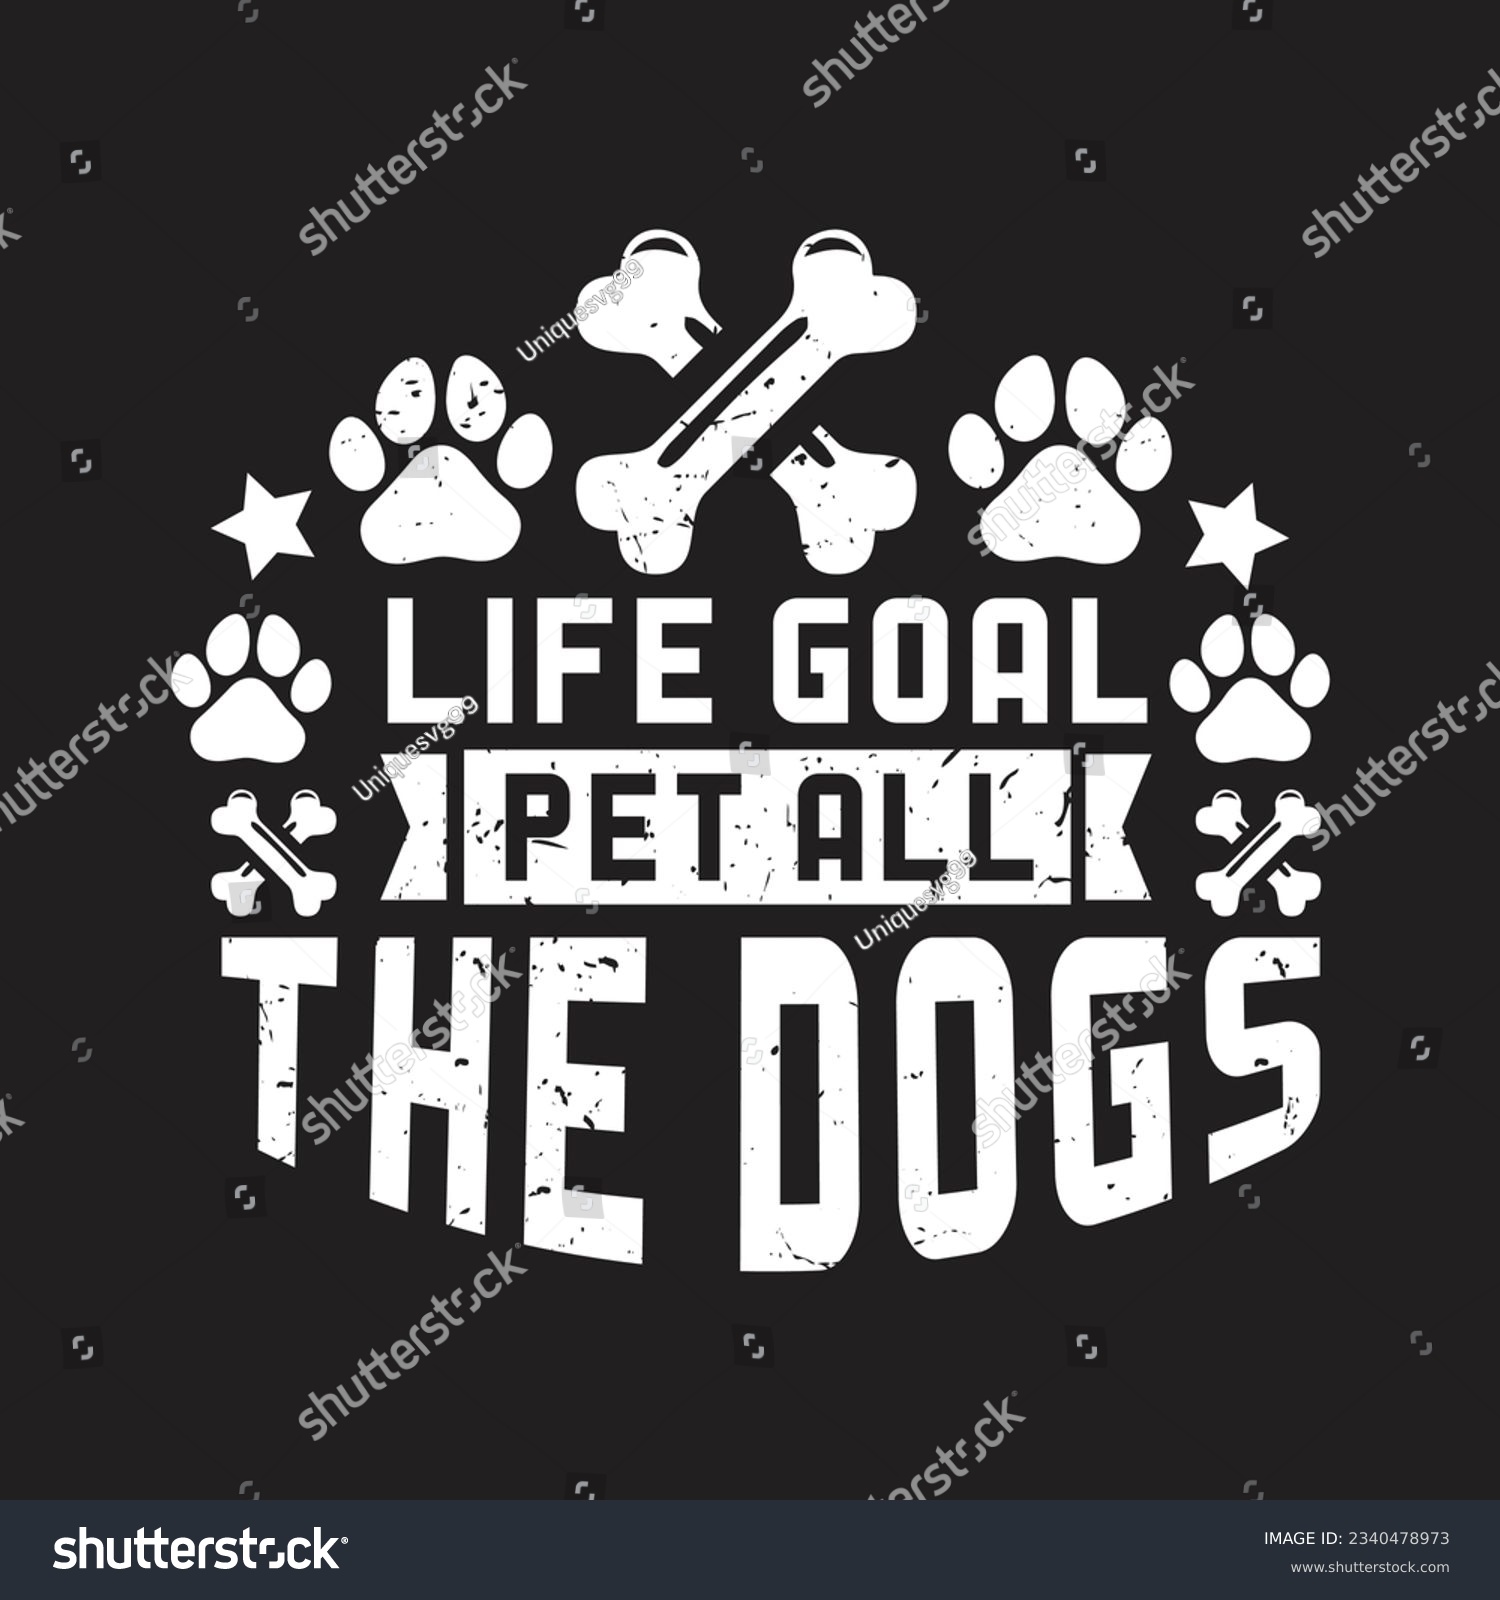 SVG of life goal pet all the dogs - Dogs t shirt design and poster. svg